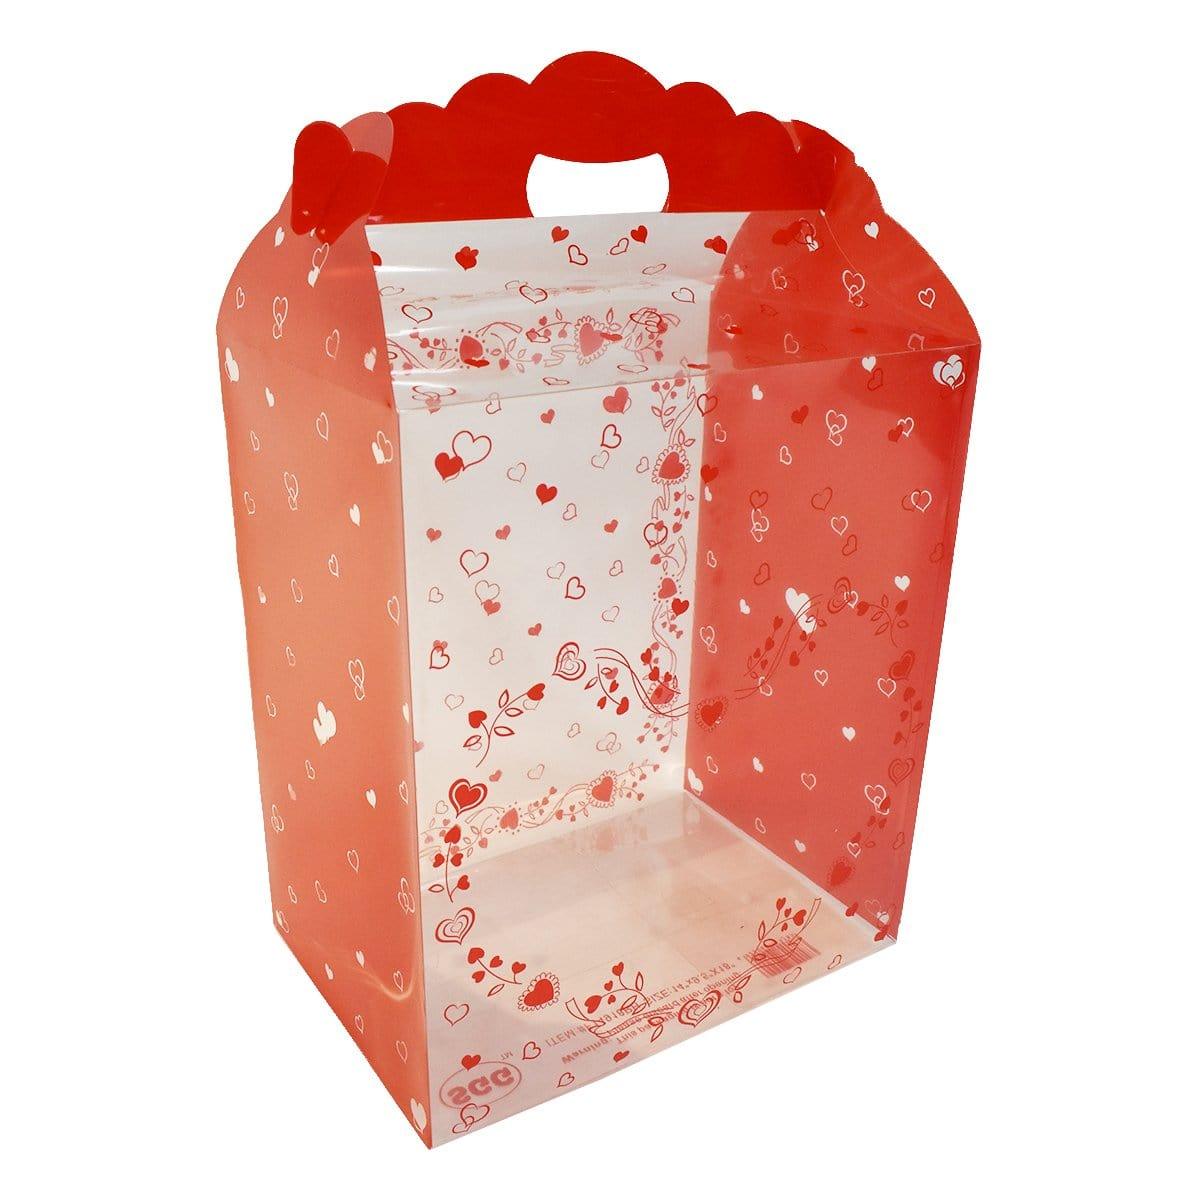 Buy Valentine's Day Large Print Heart Square Box sold at Party Expert